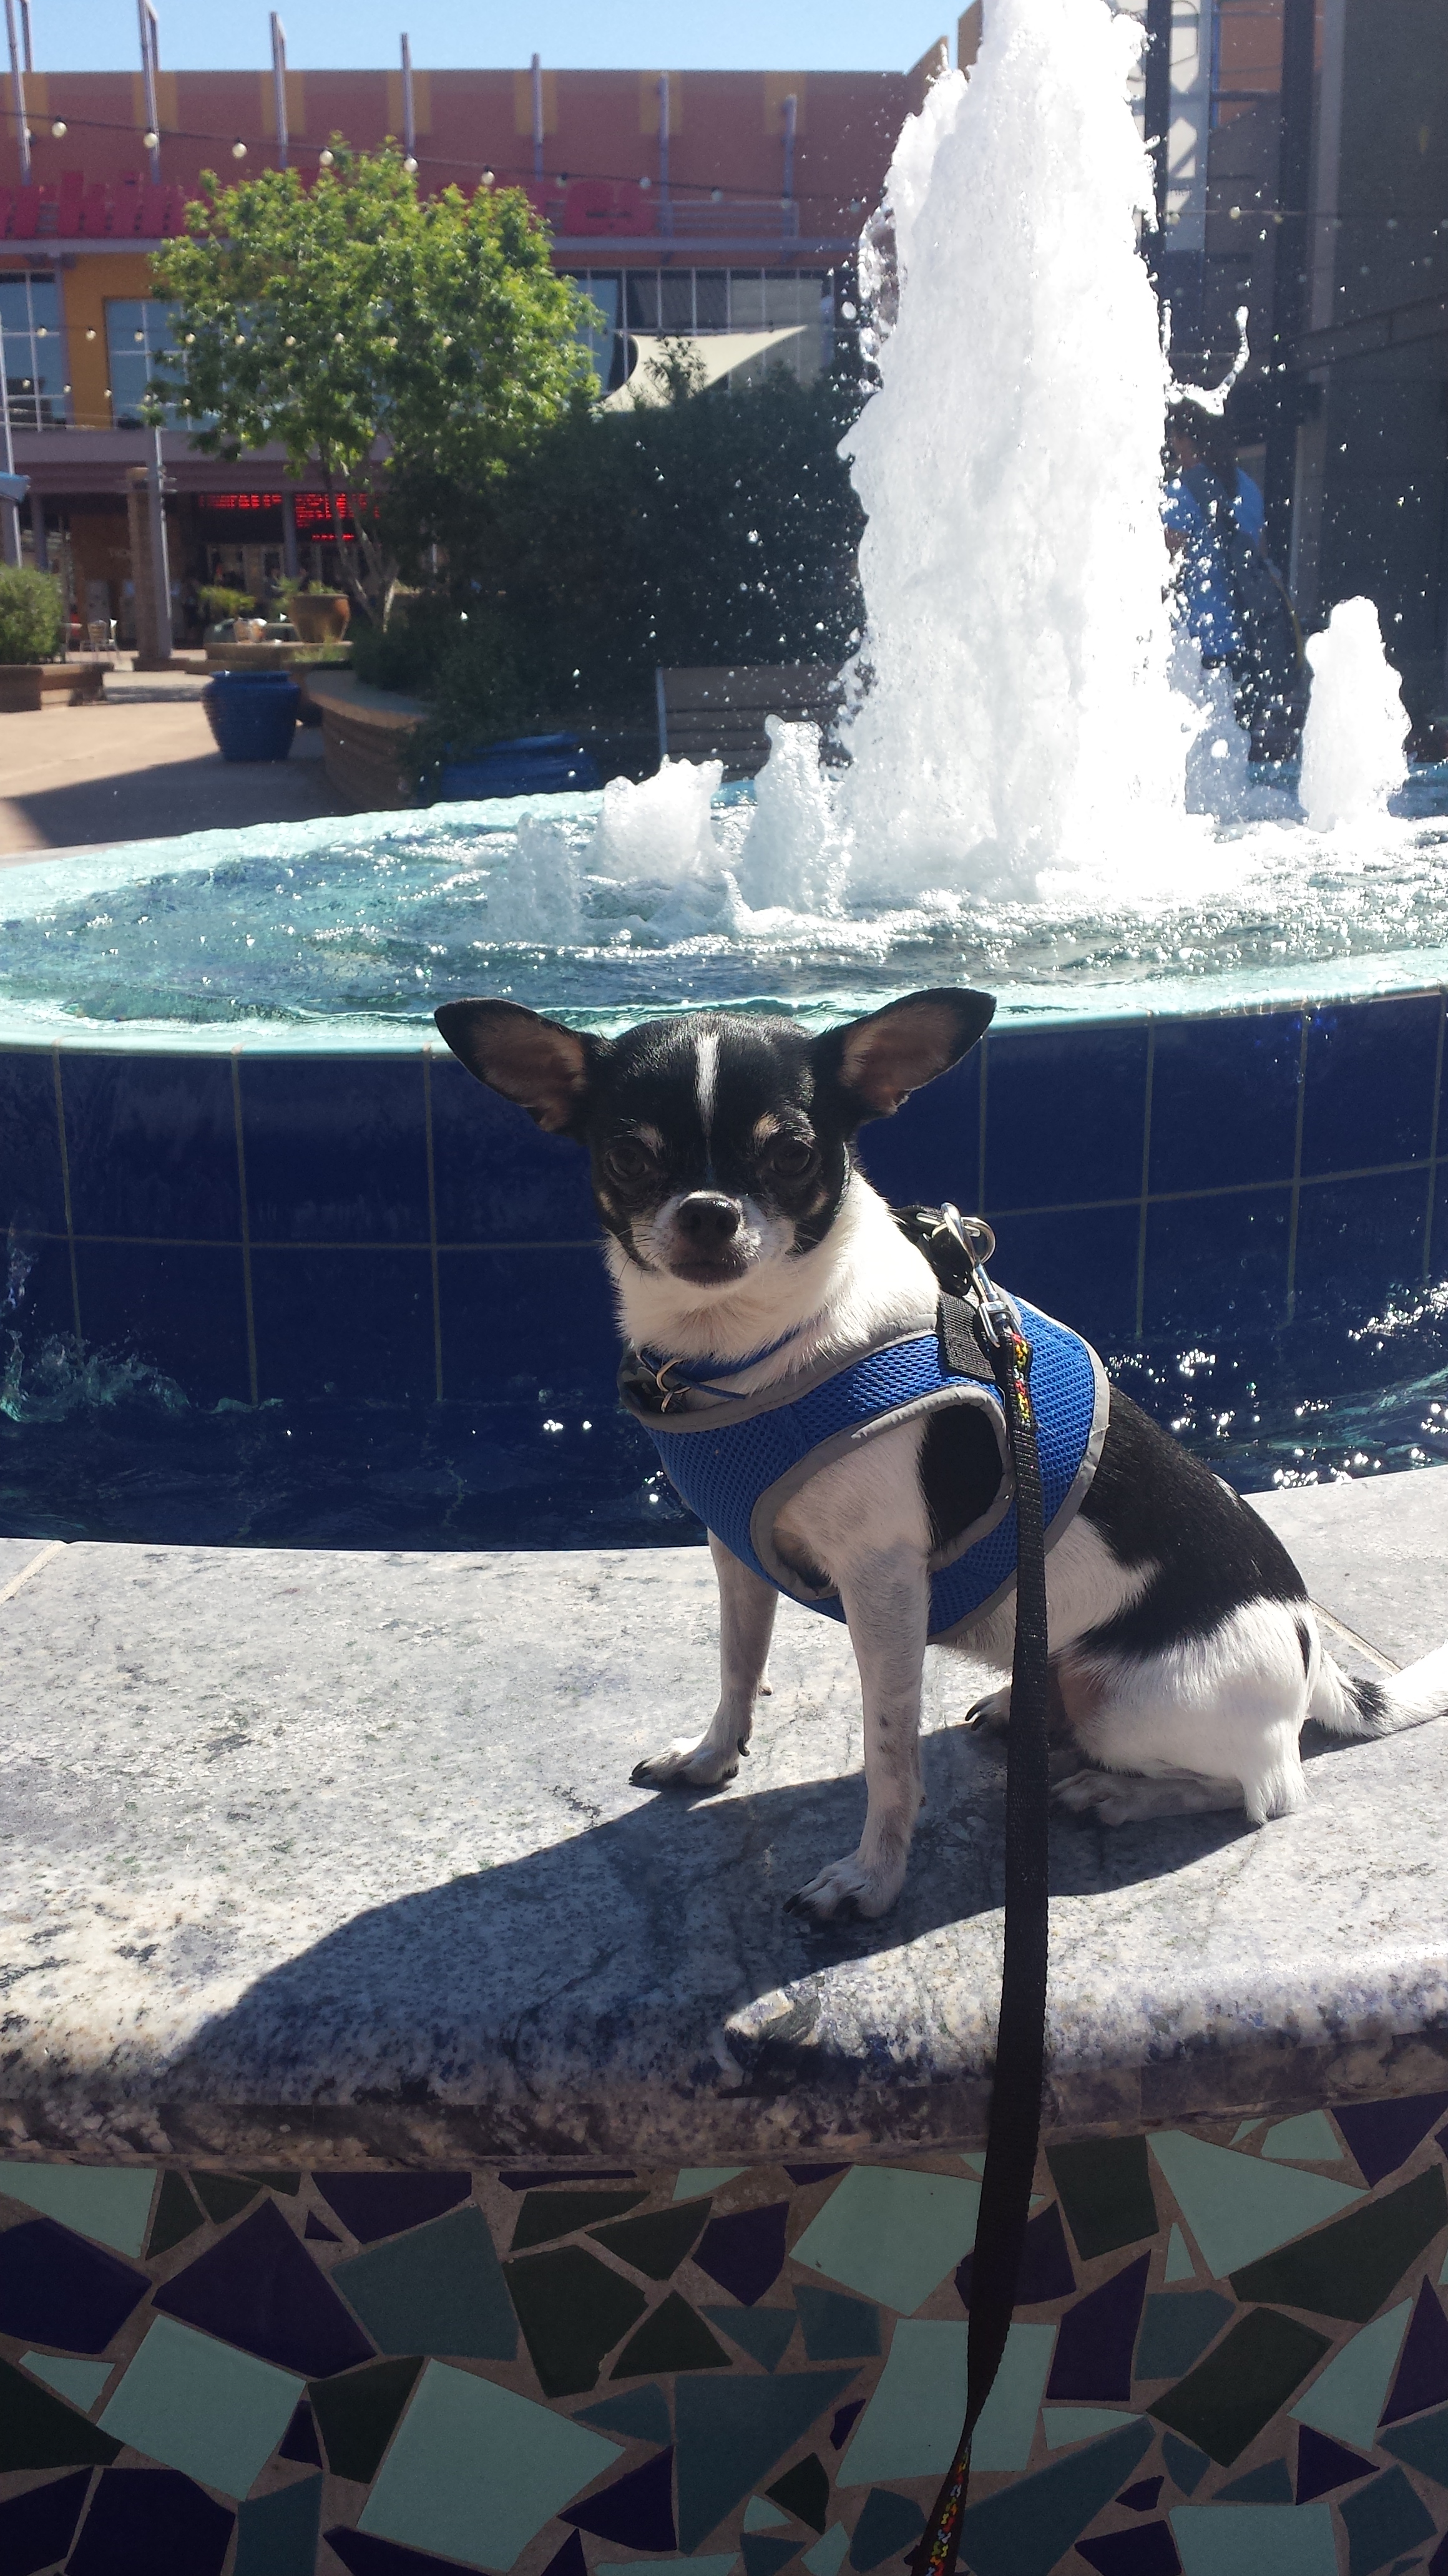 Wynston wasn't too fond of the fountain...